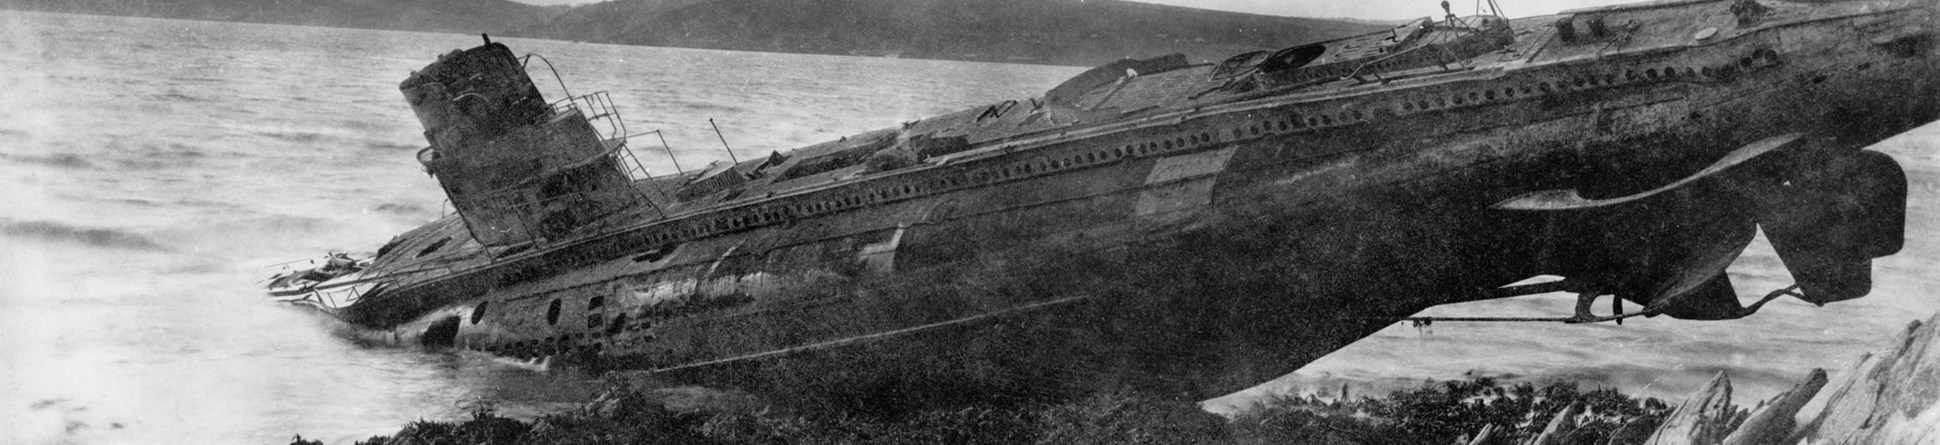 A black and white archive image of a submarine stranded on a rocky coast.